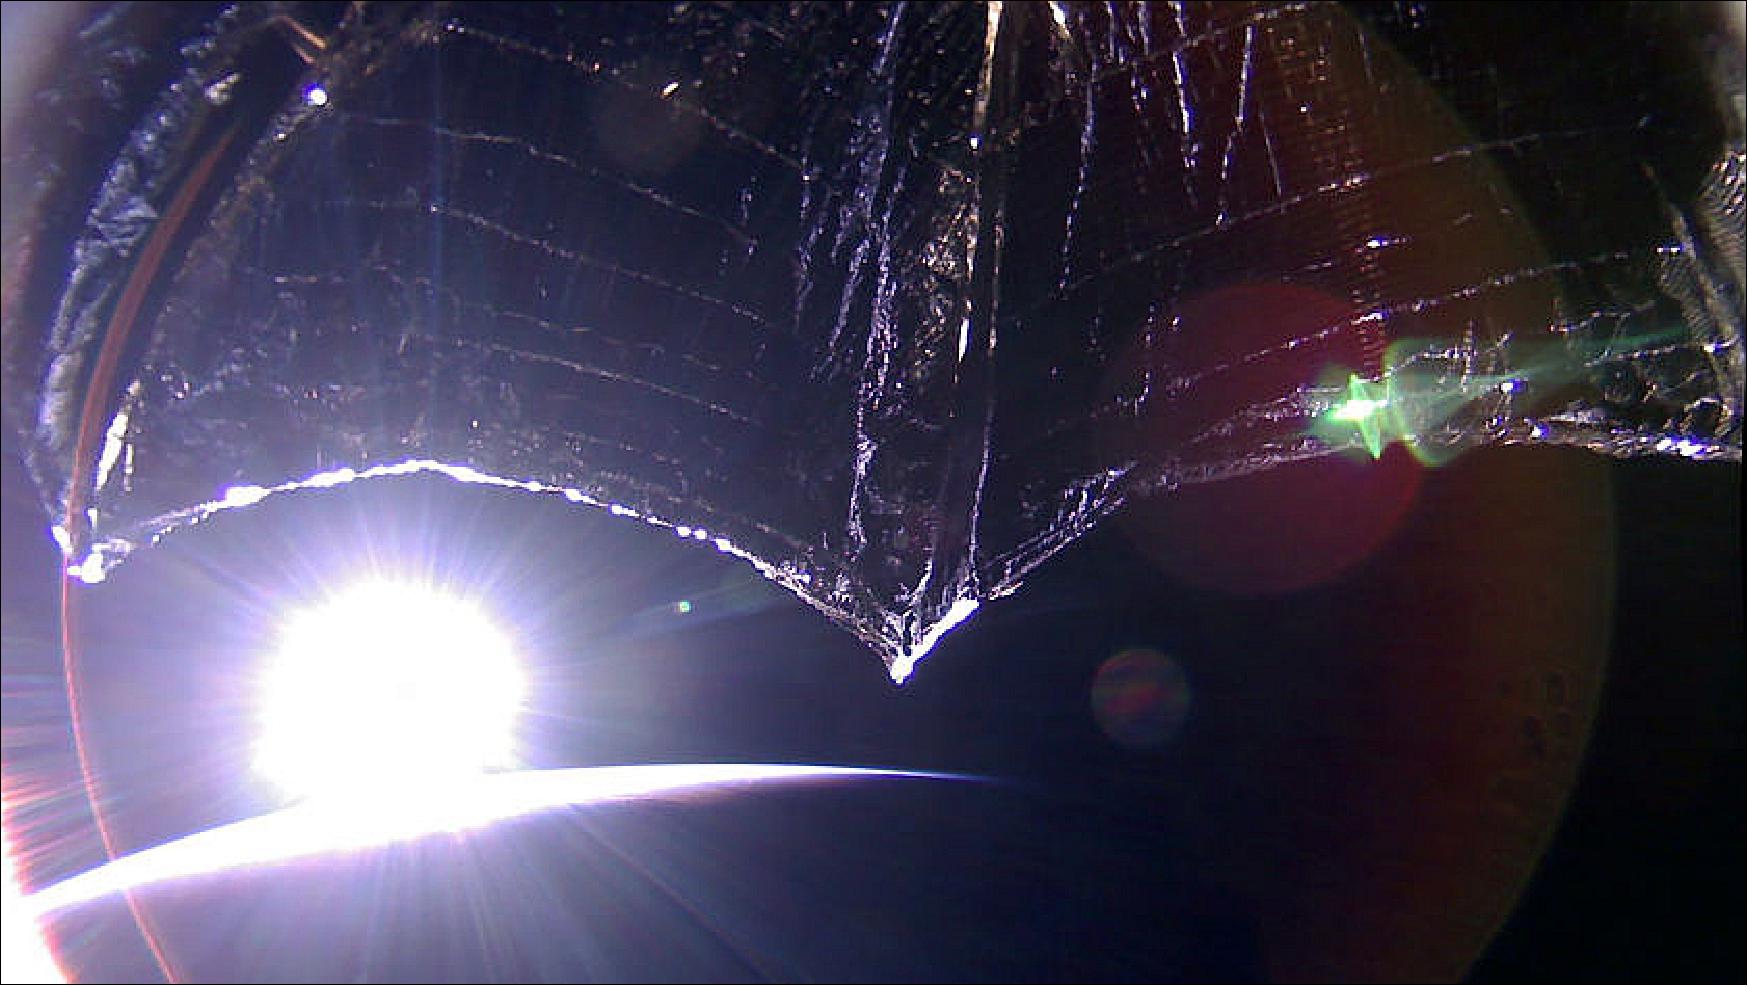 Figure 8: LightSail 2 Orbital Sunrise: The Sun rises over the horizon in this image from LightSail-2 captured on 28 September 2019. The sail appears curved due to the spacecraft's 185-degree fisheye camera lens. The image has been color corrected and some of the distortion has been removed (image credit: The Planetary Society)